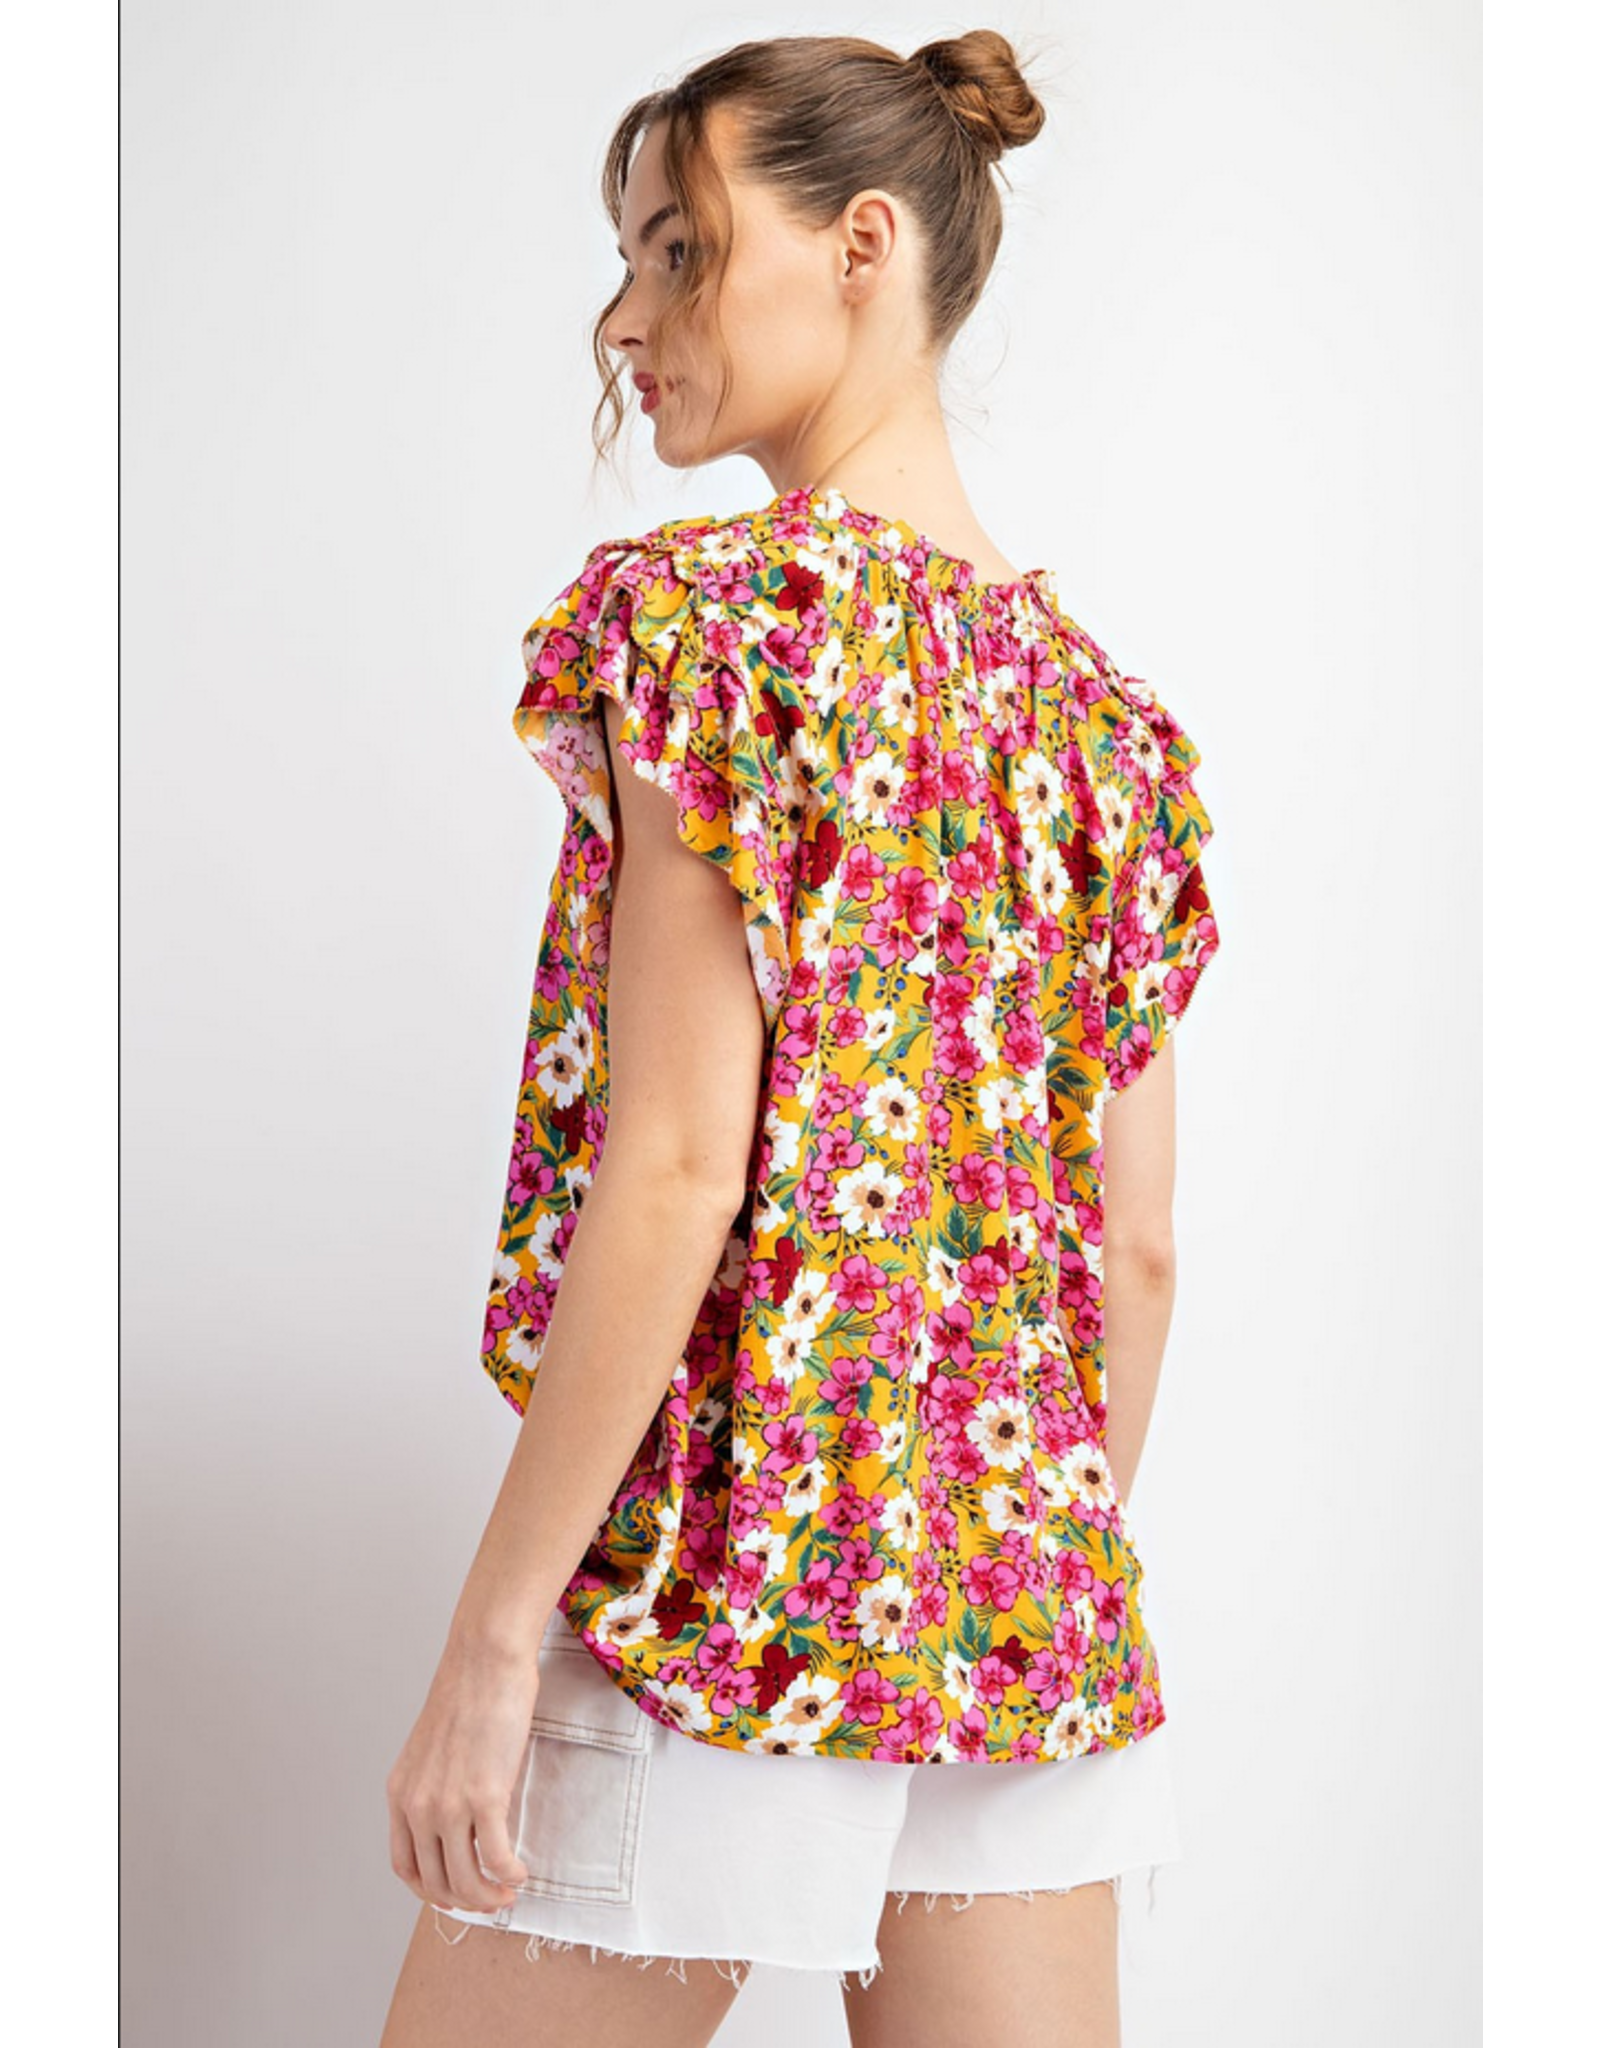 eesome Floral Patterned Blouse